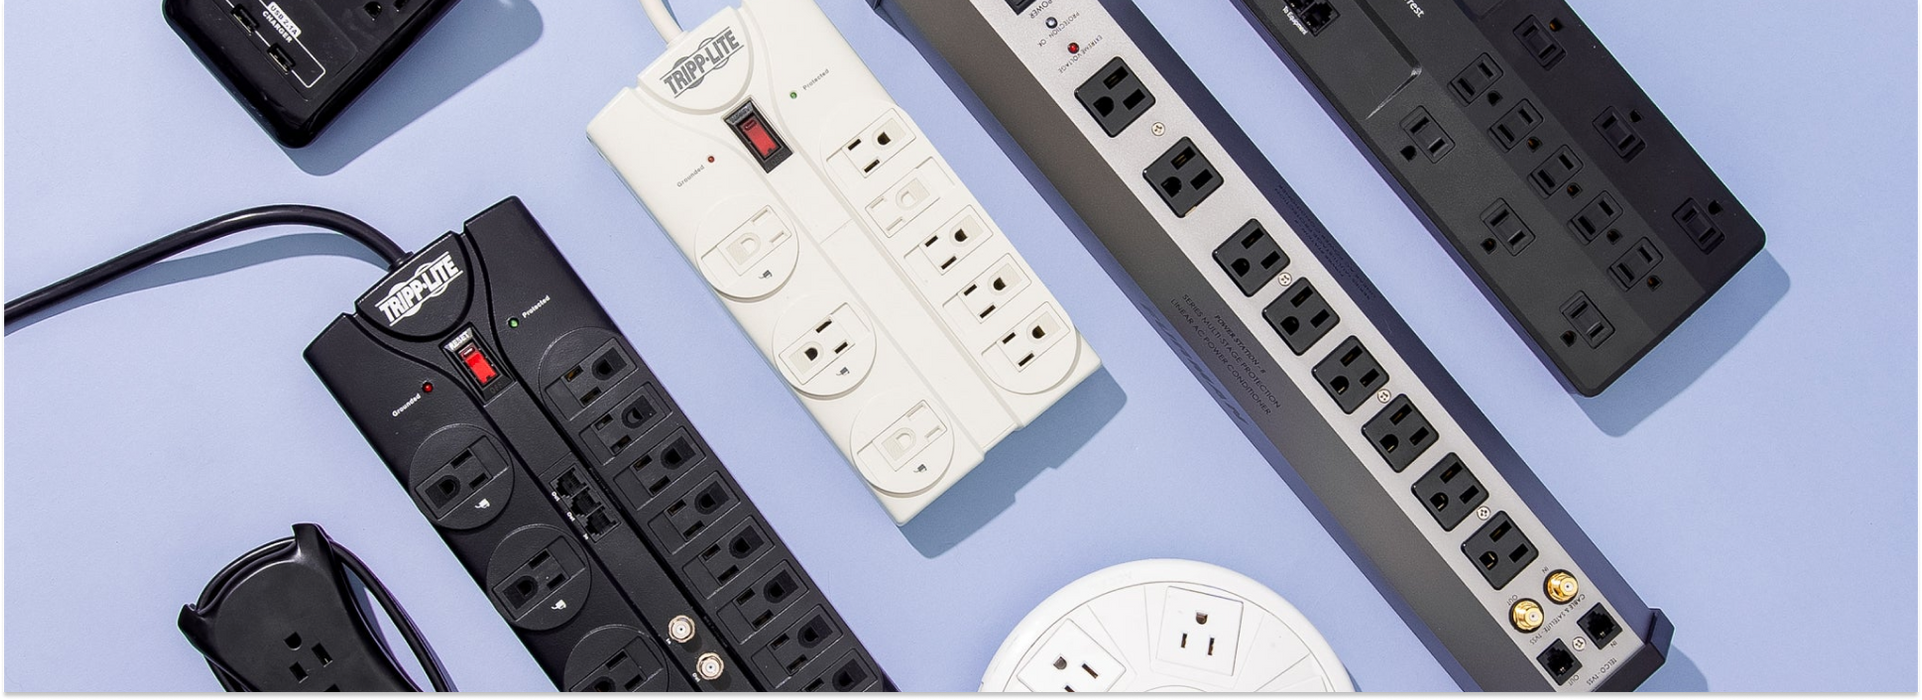 Do Surge Protectors Really Work?